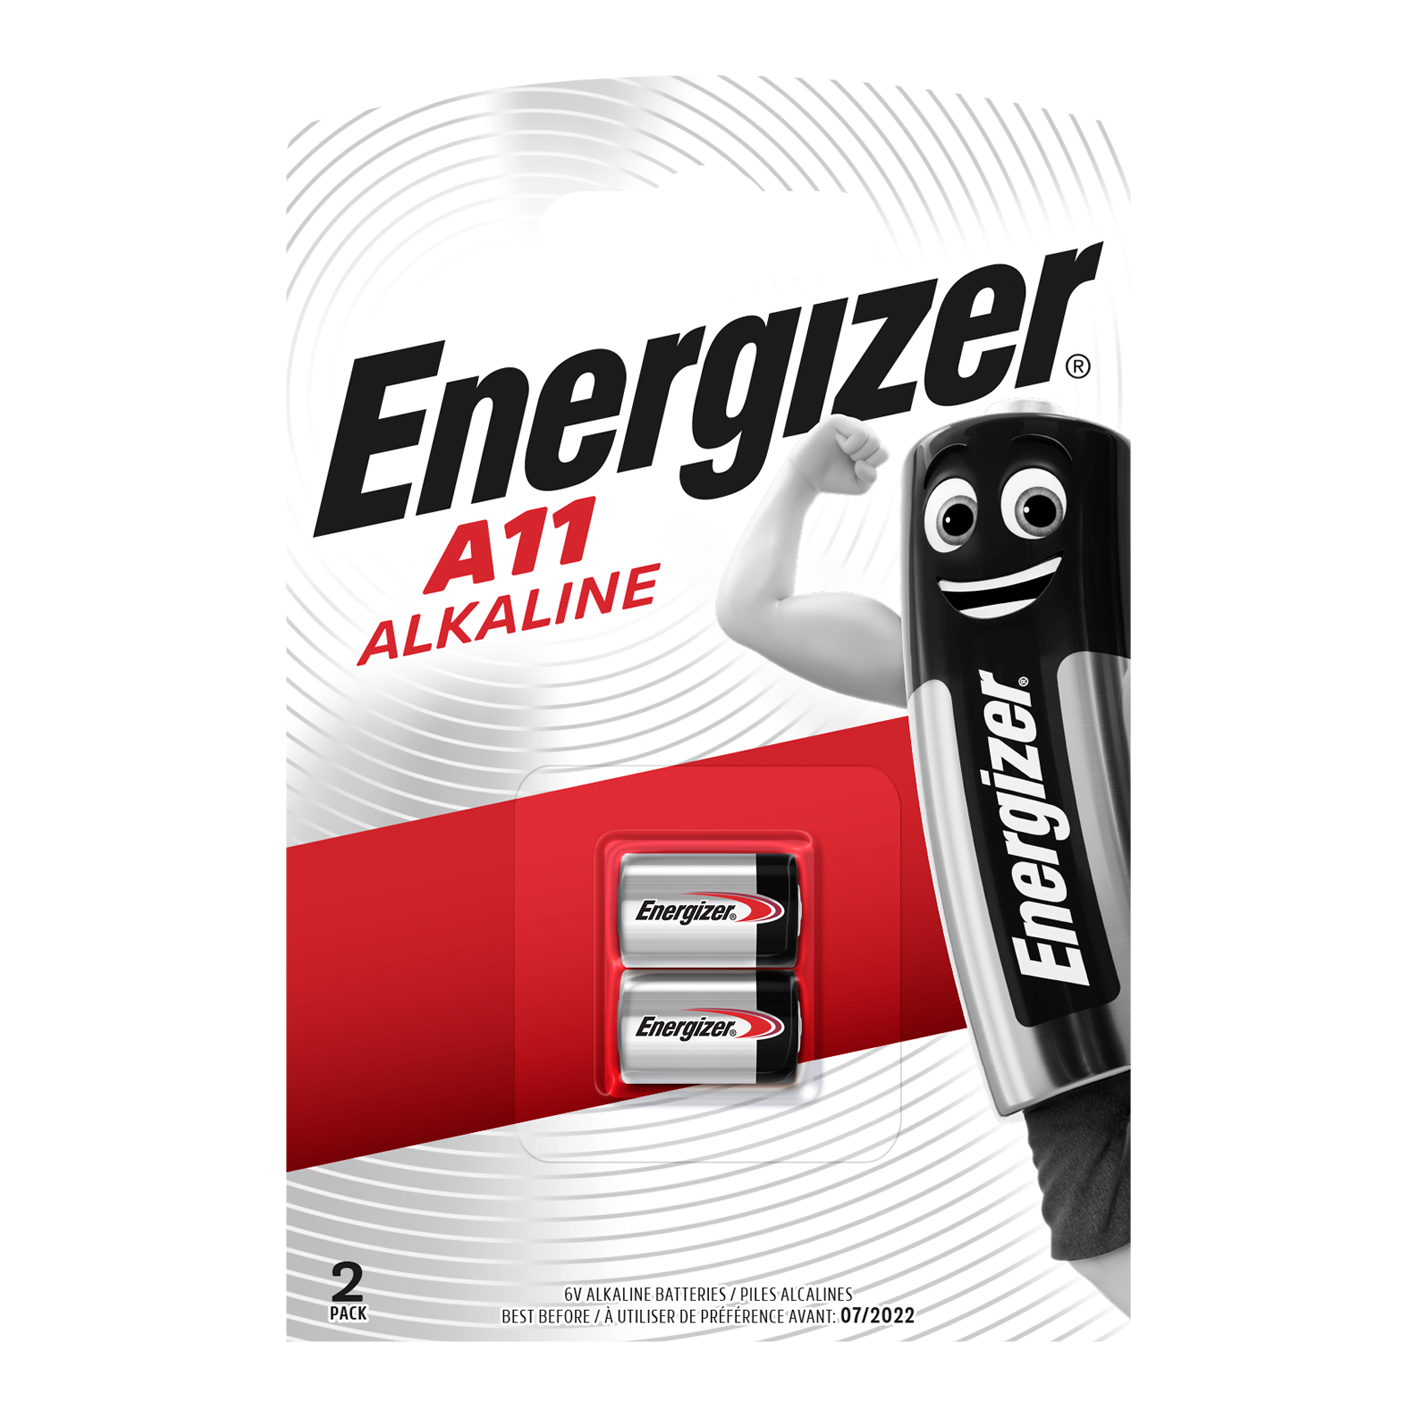 Energizer A11/E 11A Alkaline, Pack of 2